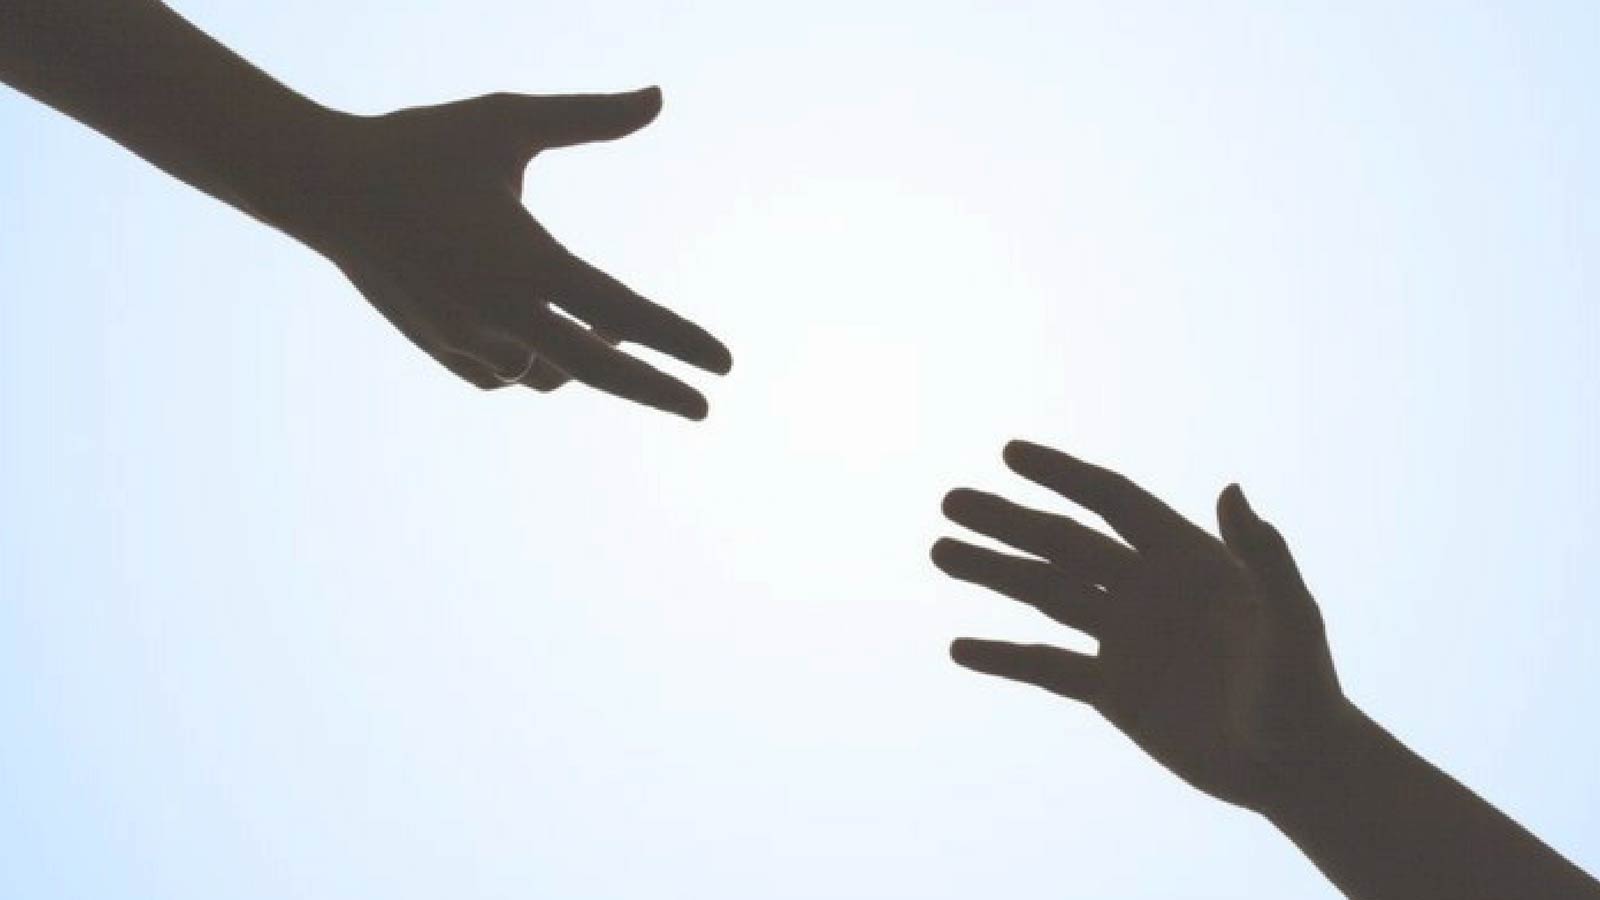 Two hands reaching toward each other